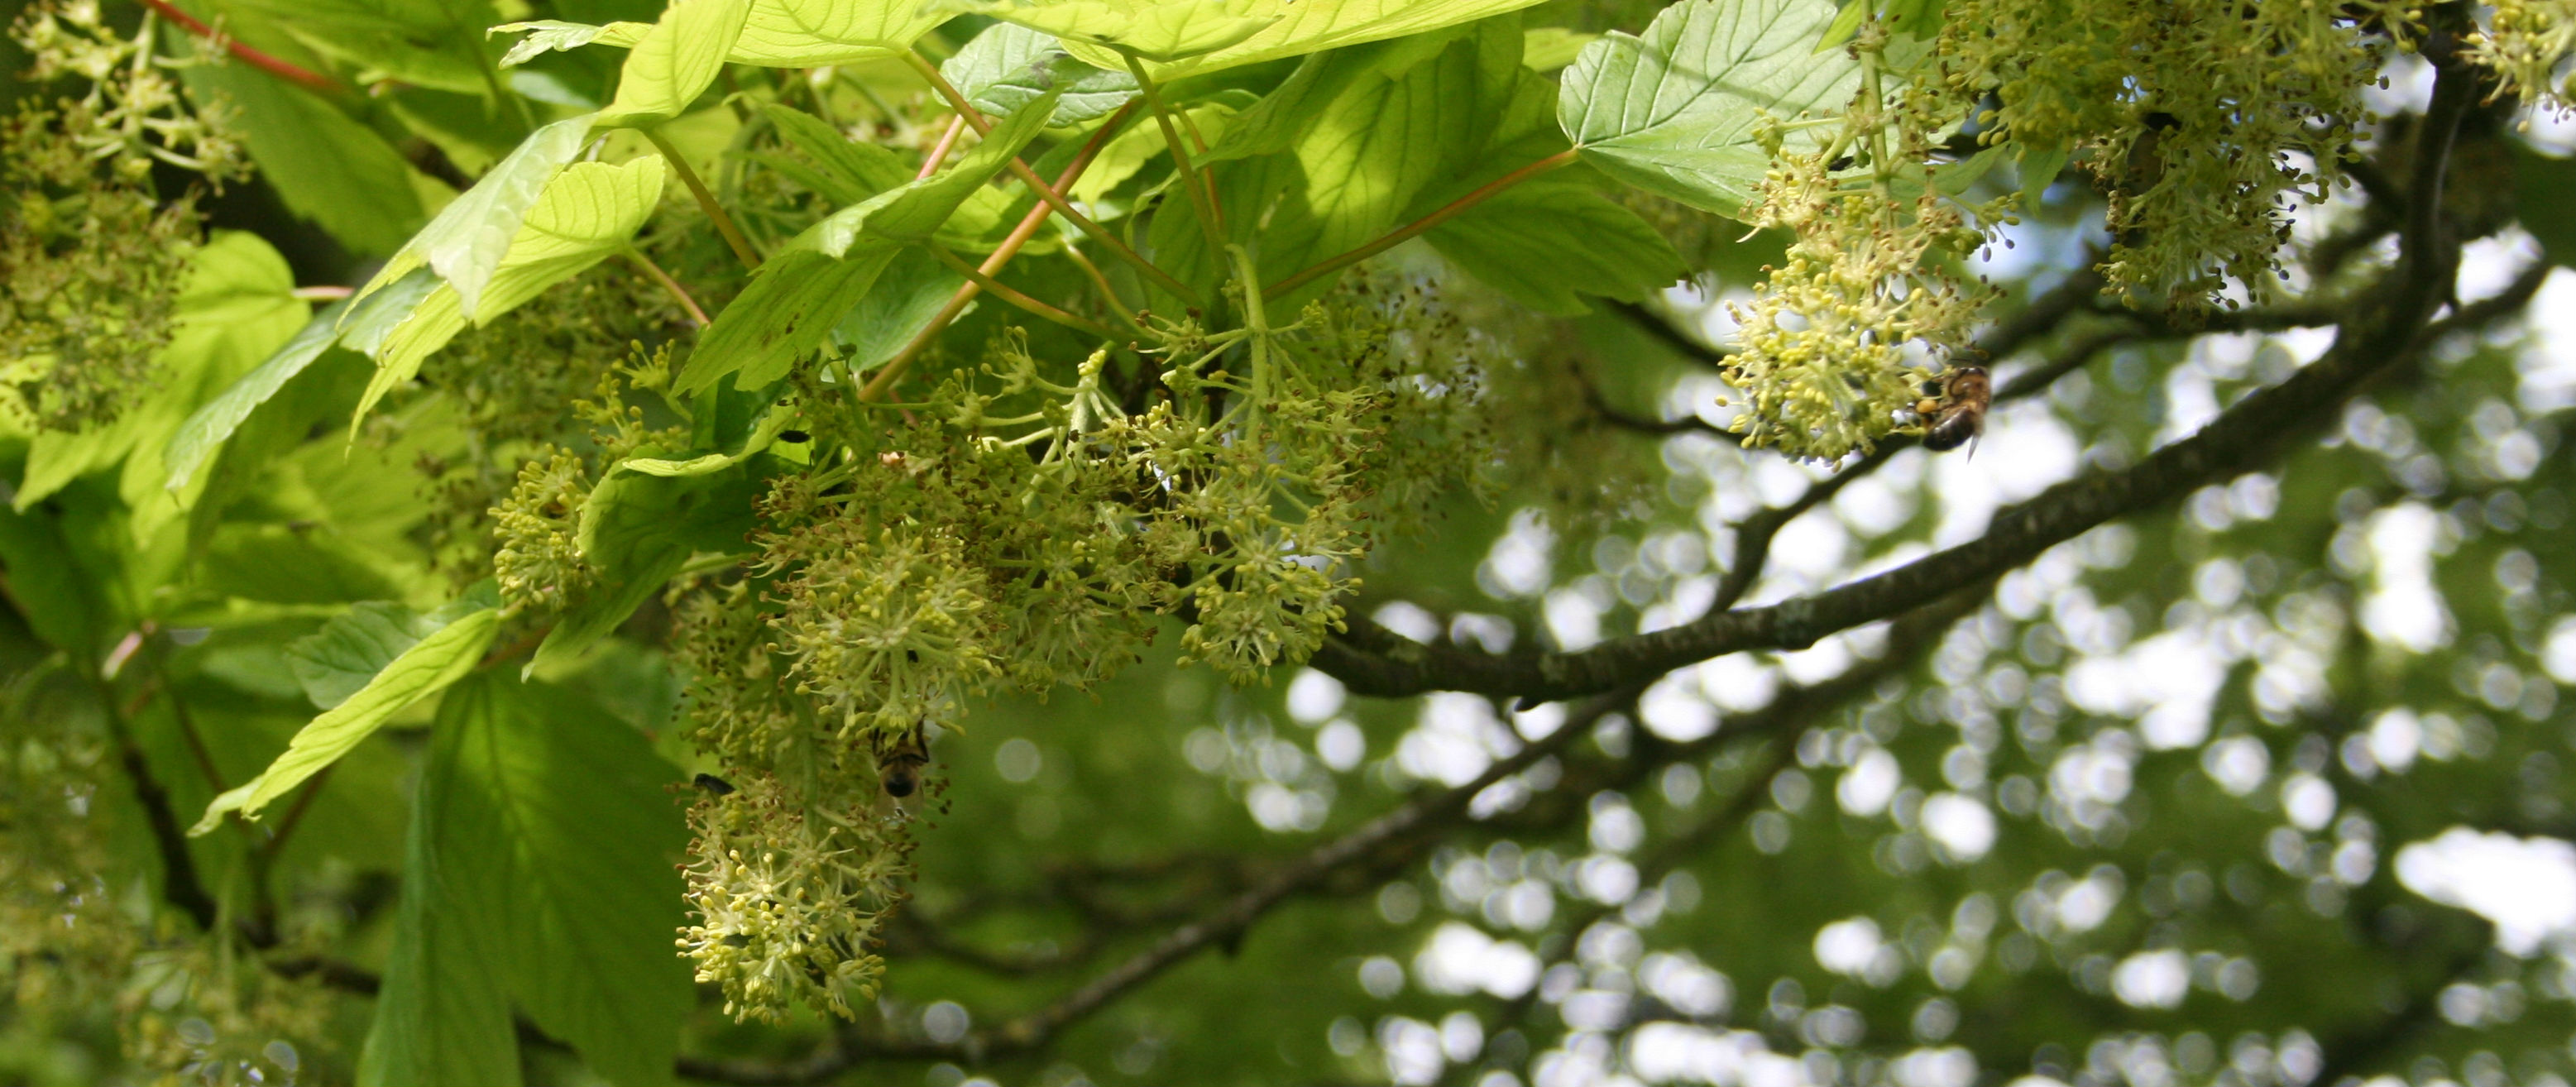 Sycamore flower with bees